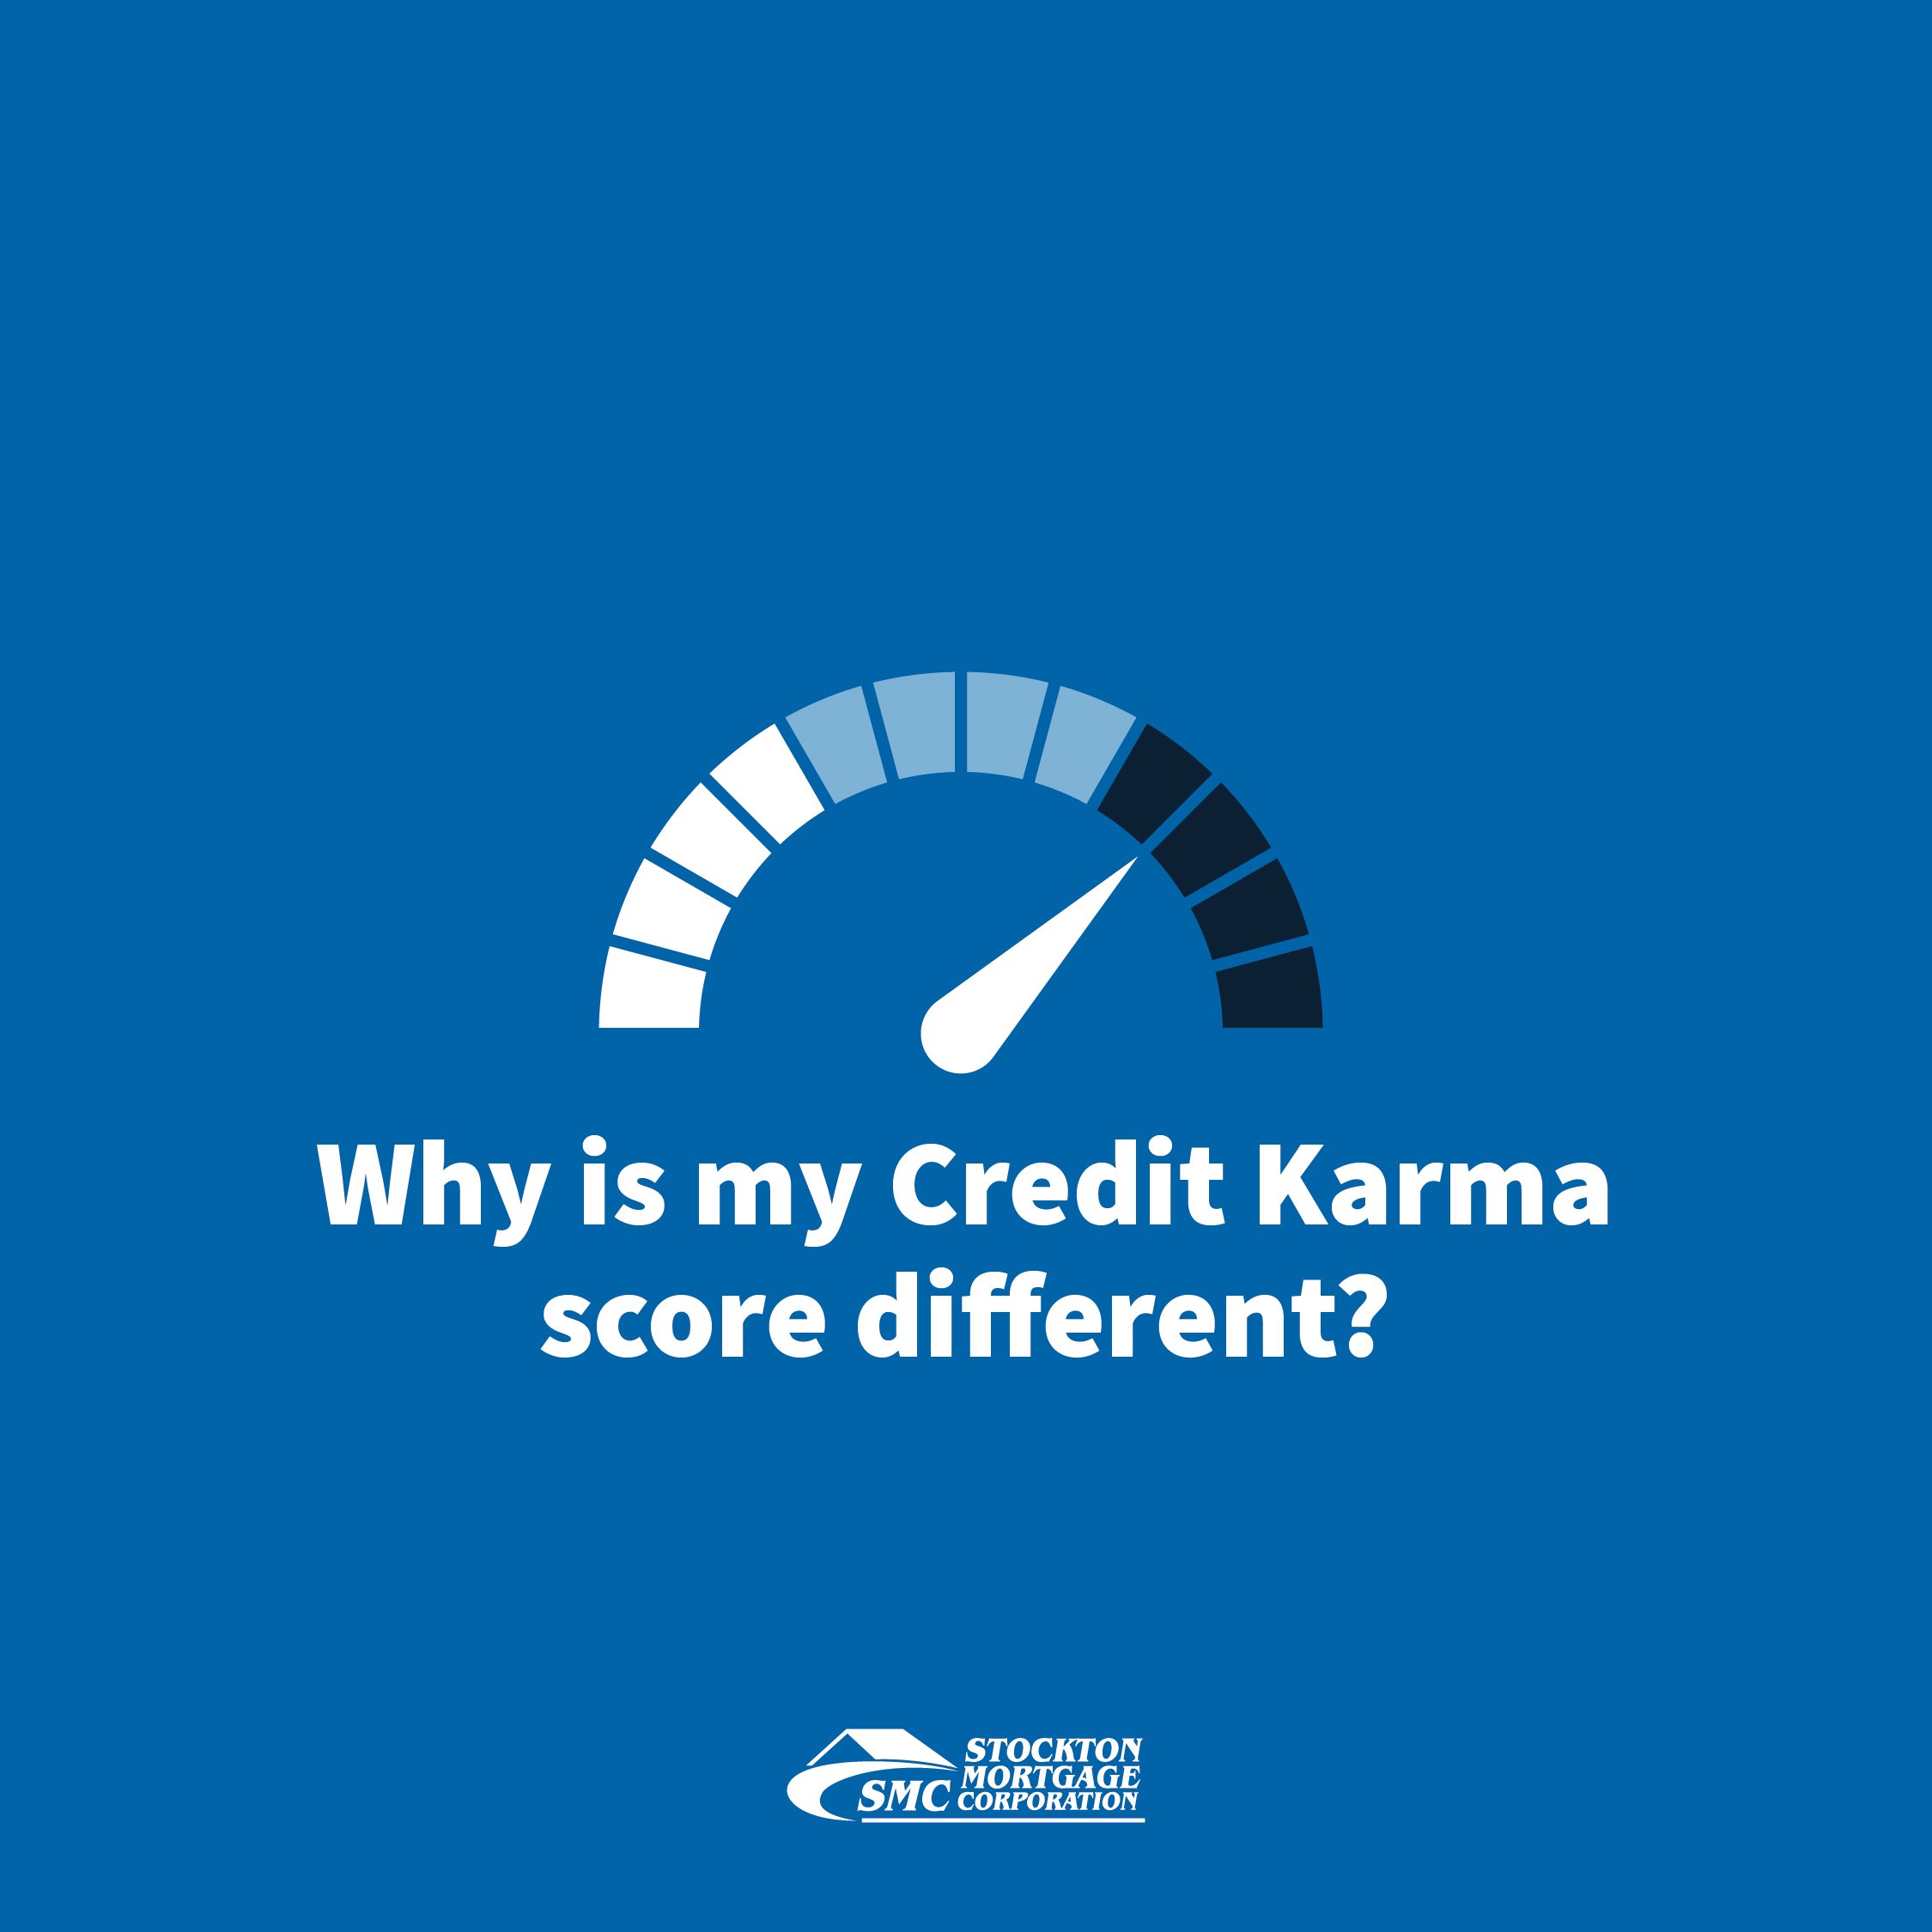 Why Is My Credit Karma Score Different?